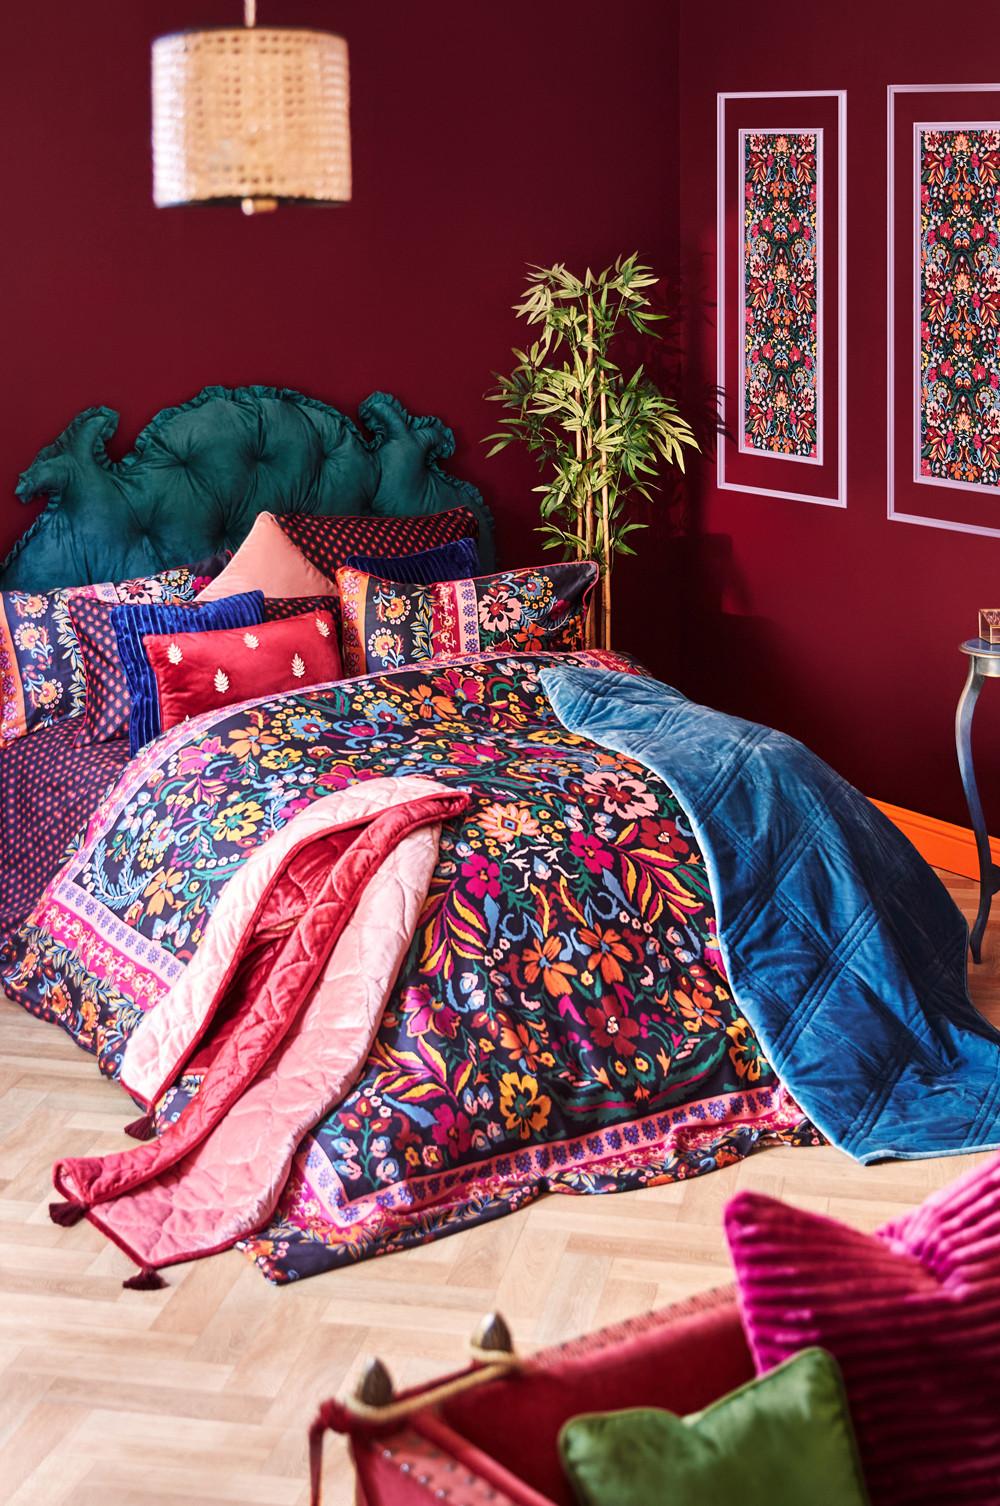 Patterned duvet cover and pillows, with blue blanket